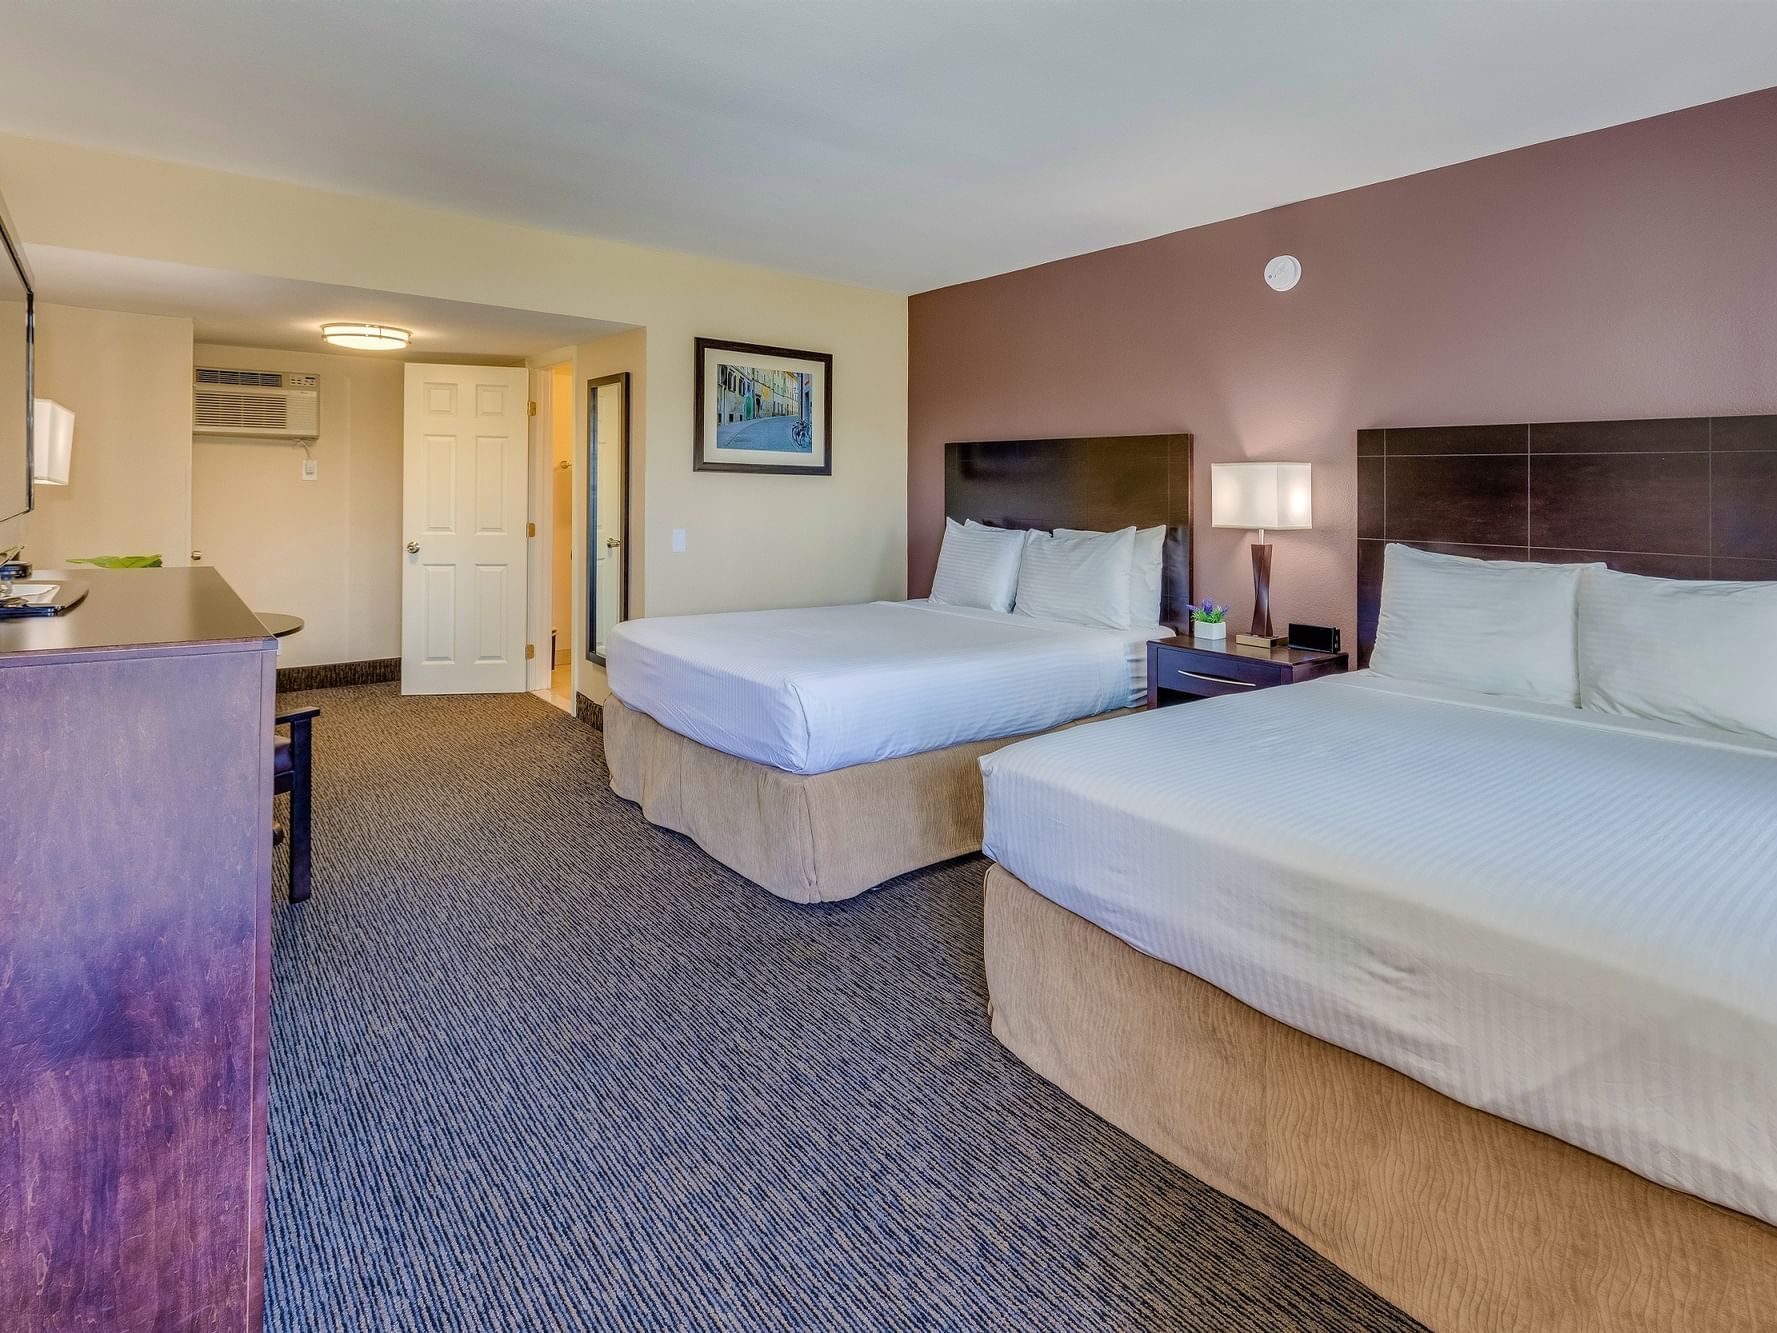 Deluxe Room with two beds at Grand Legacy at The Park Anaheim.